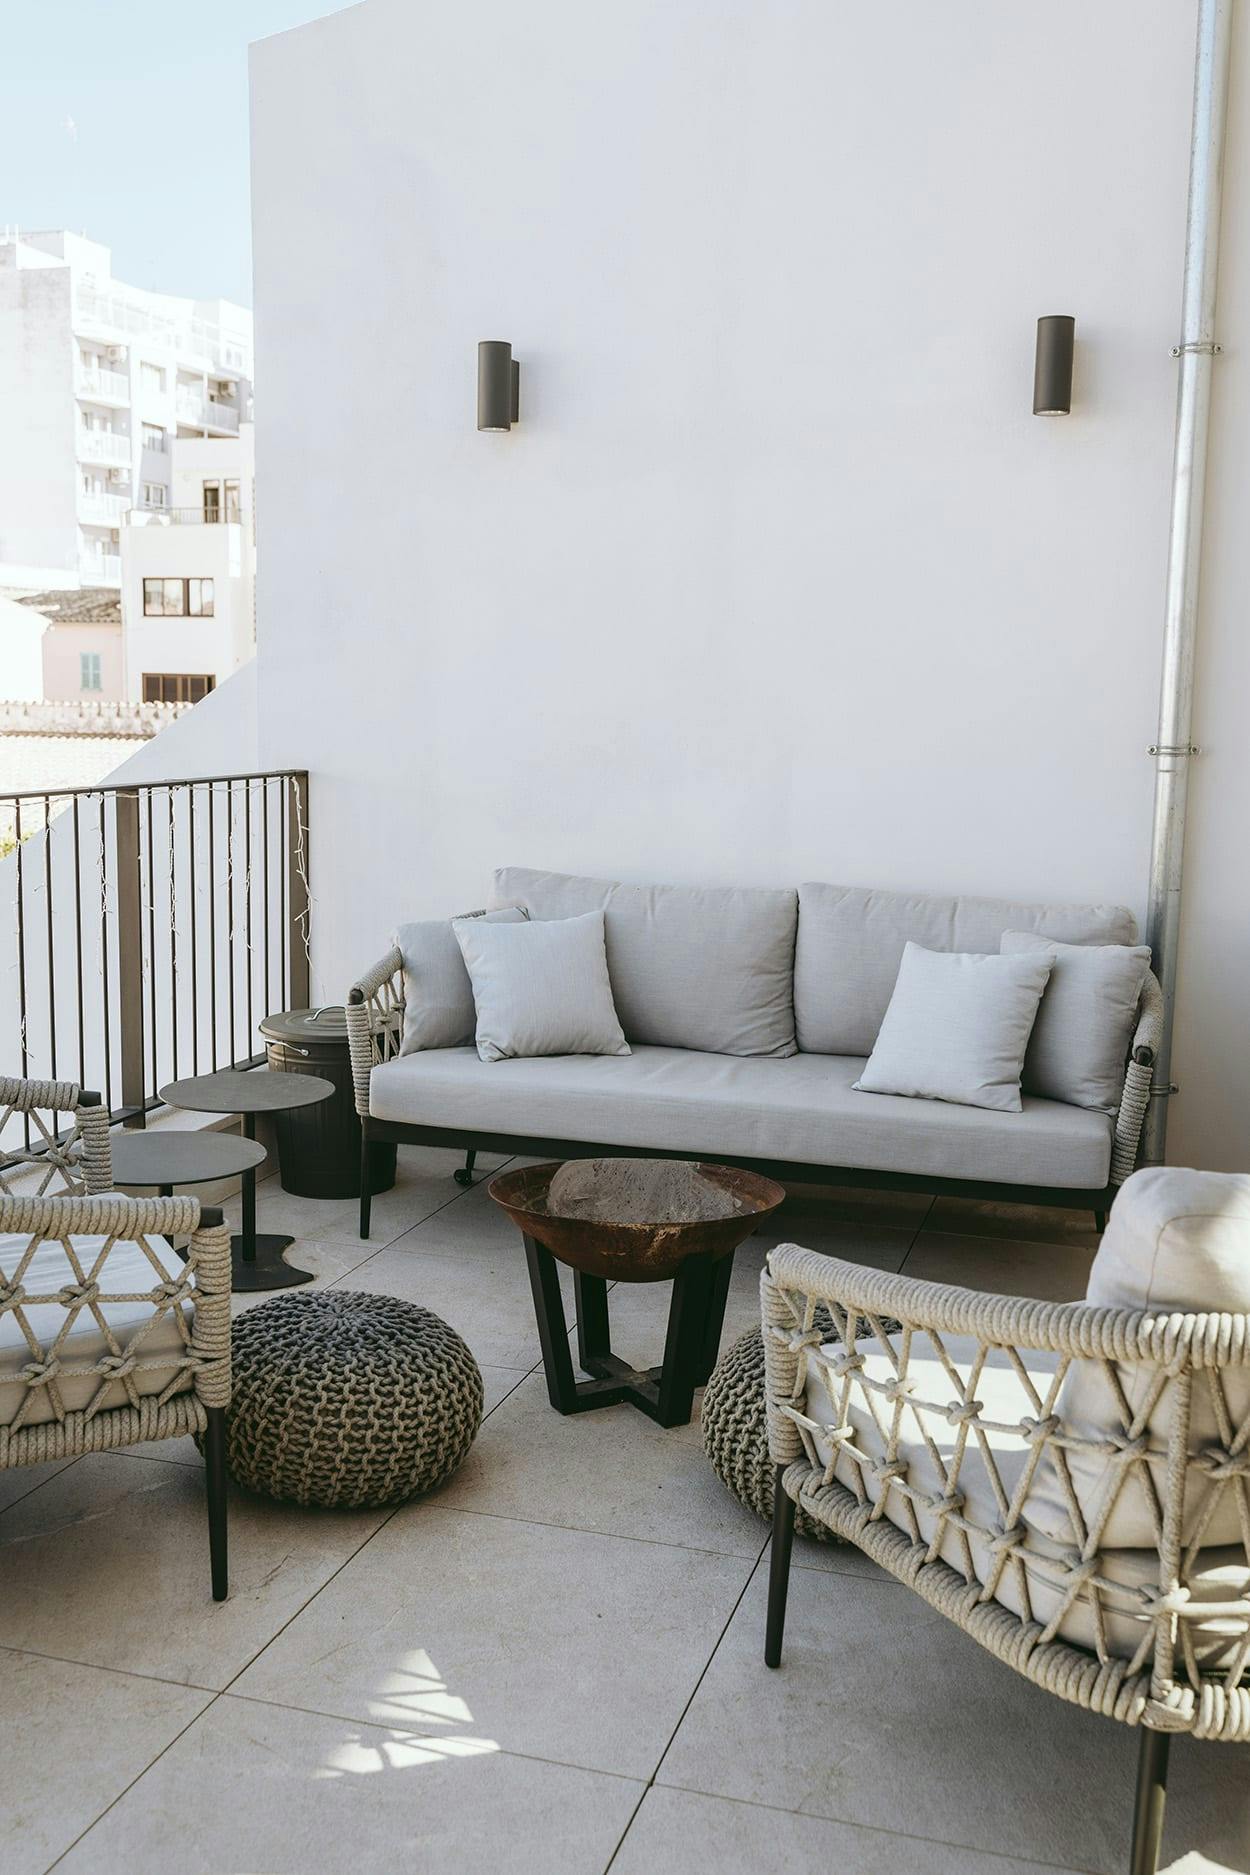 The image features a white patio with a couch, a chair, and a table.